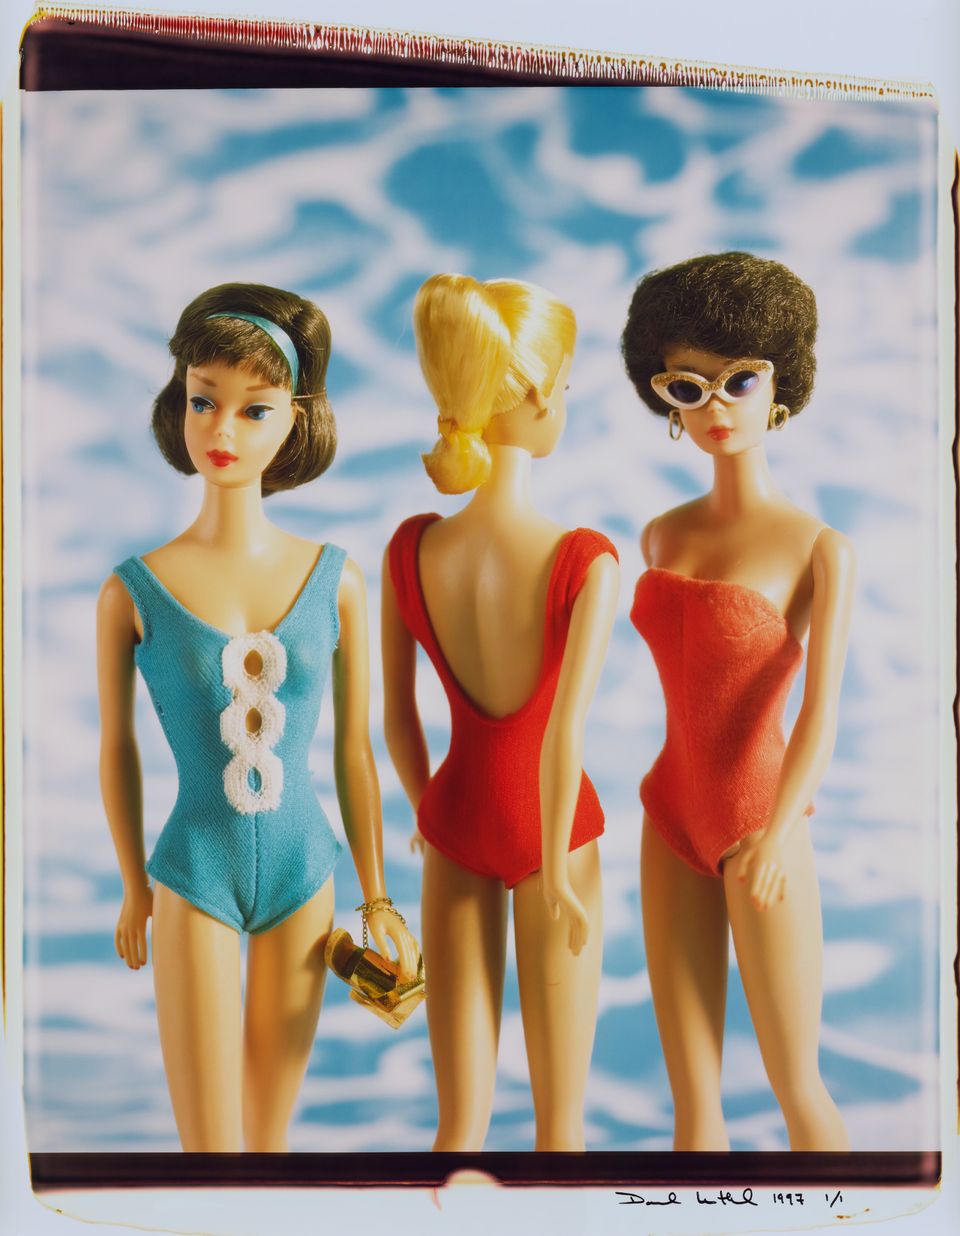 David Levinthals's photograph of 3 Barbies in bathing suits